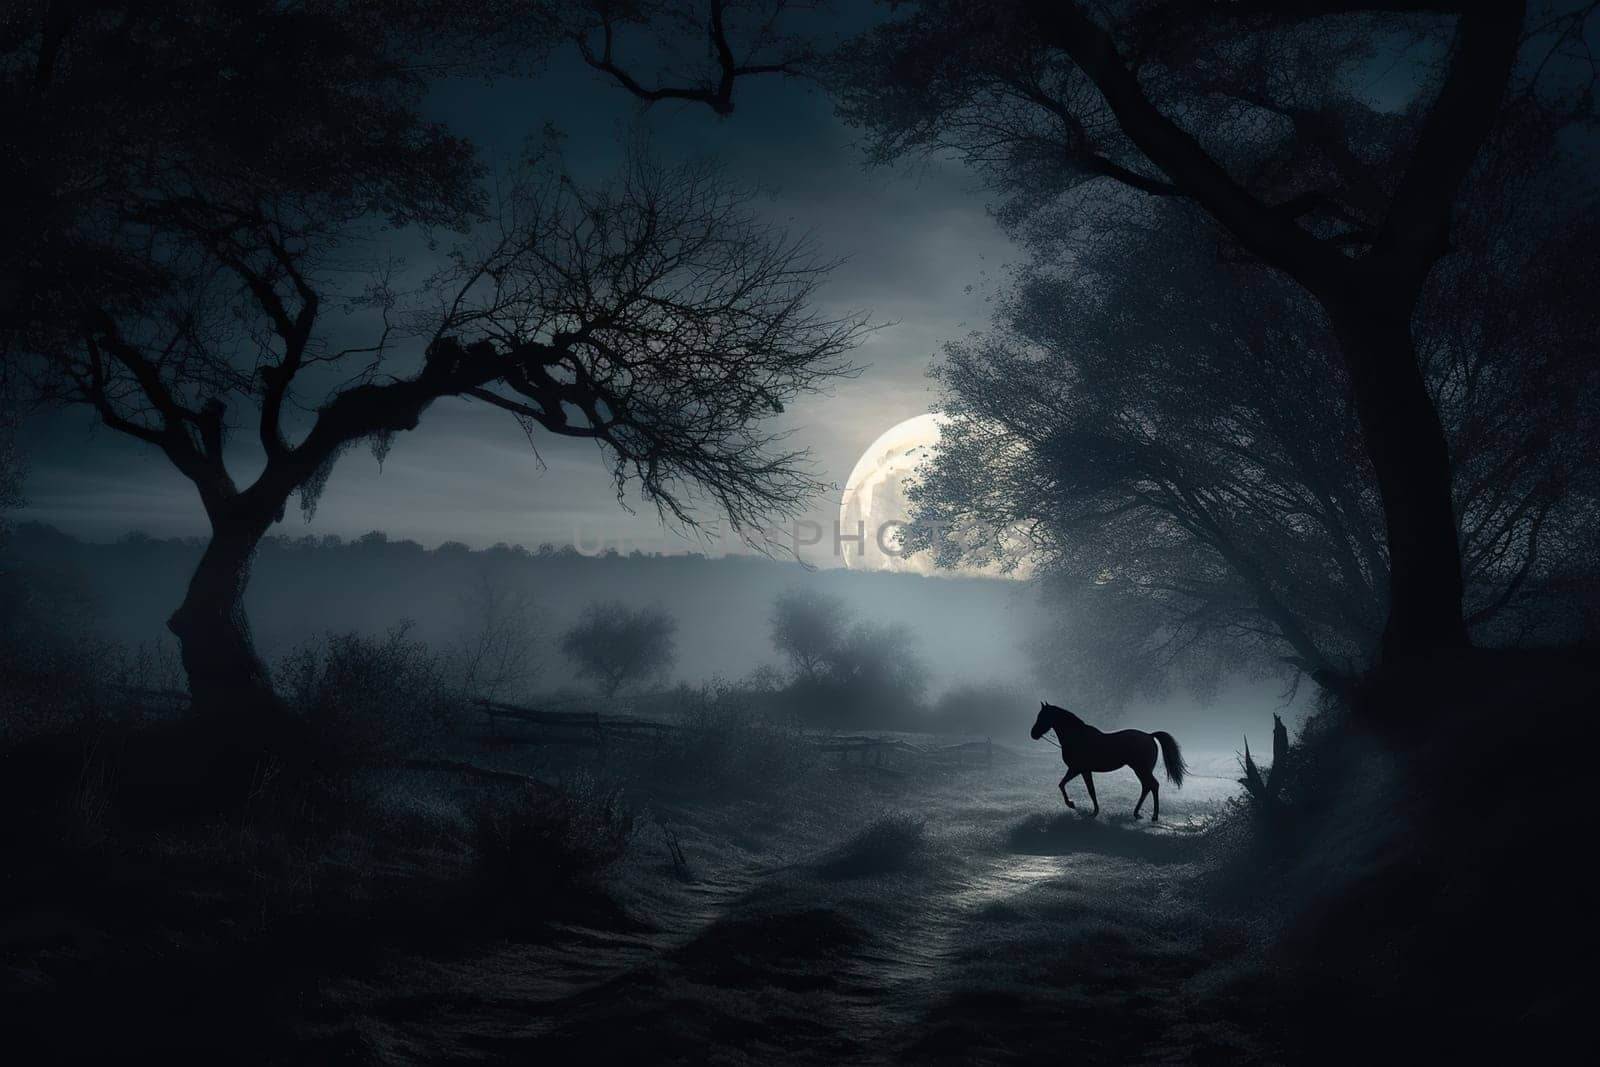 Night Scene With The Running Horse Under The Giant Moonlight by tan4ikk1